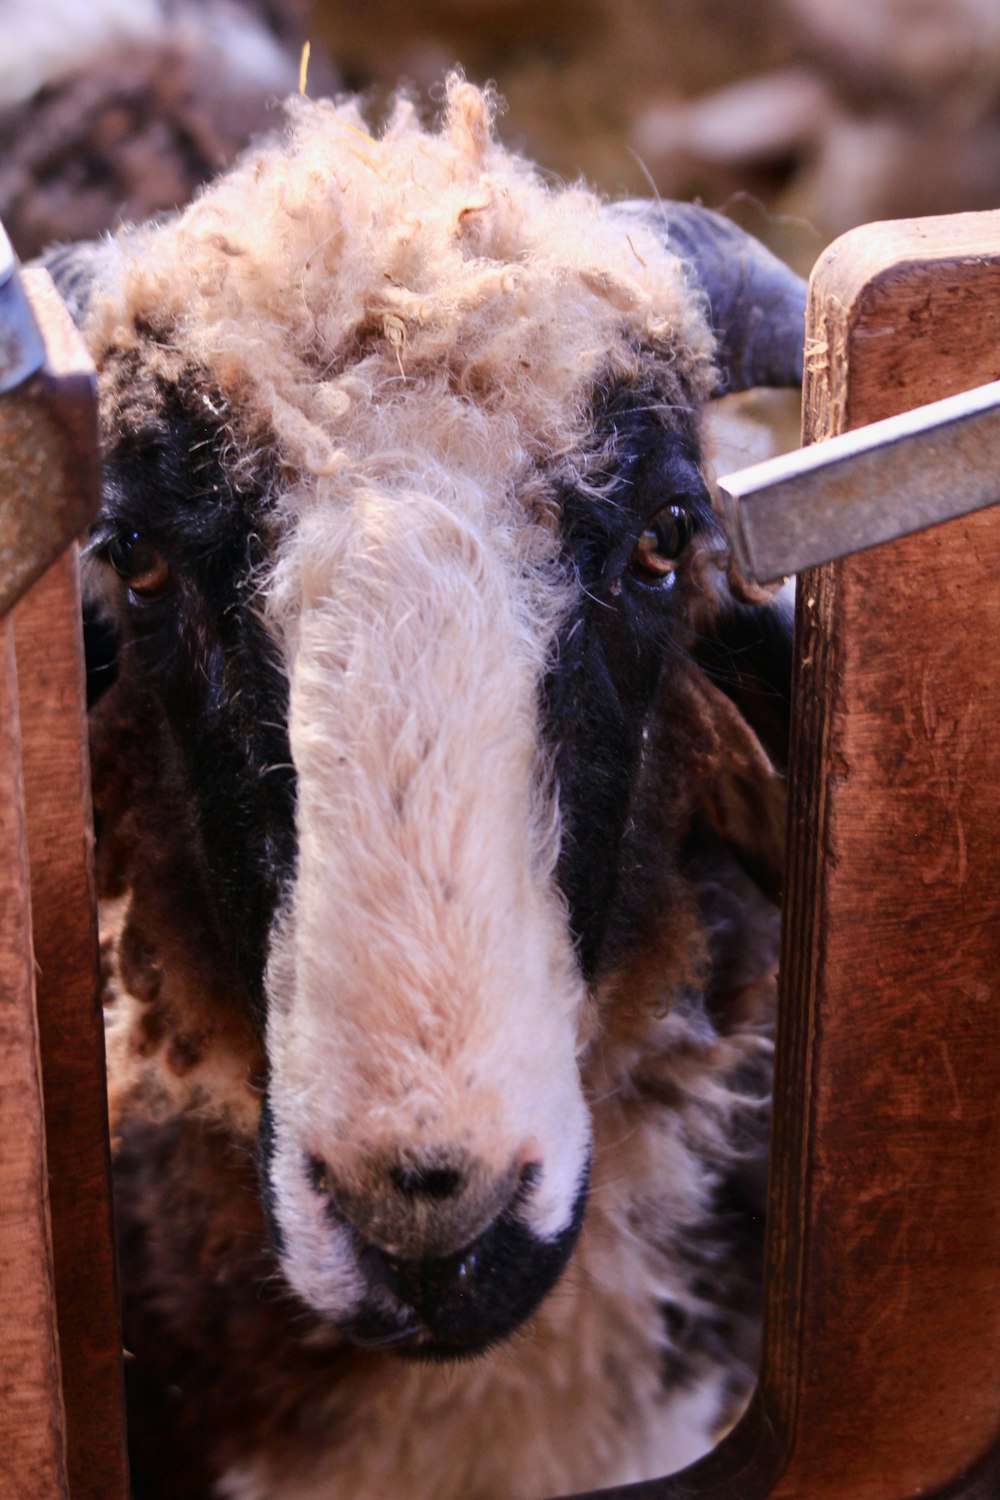 a close up of a sheep in a wooden chair